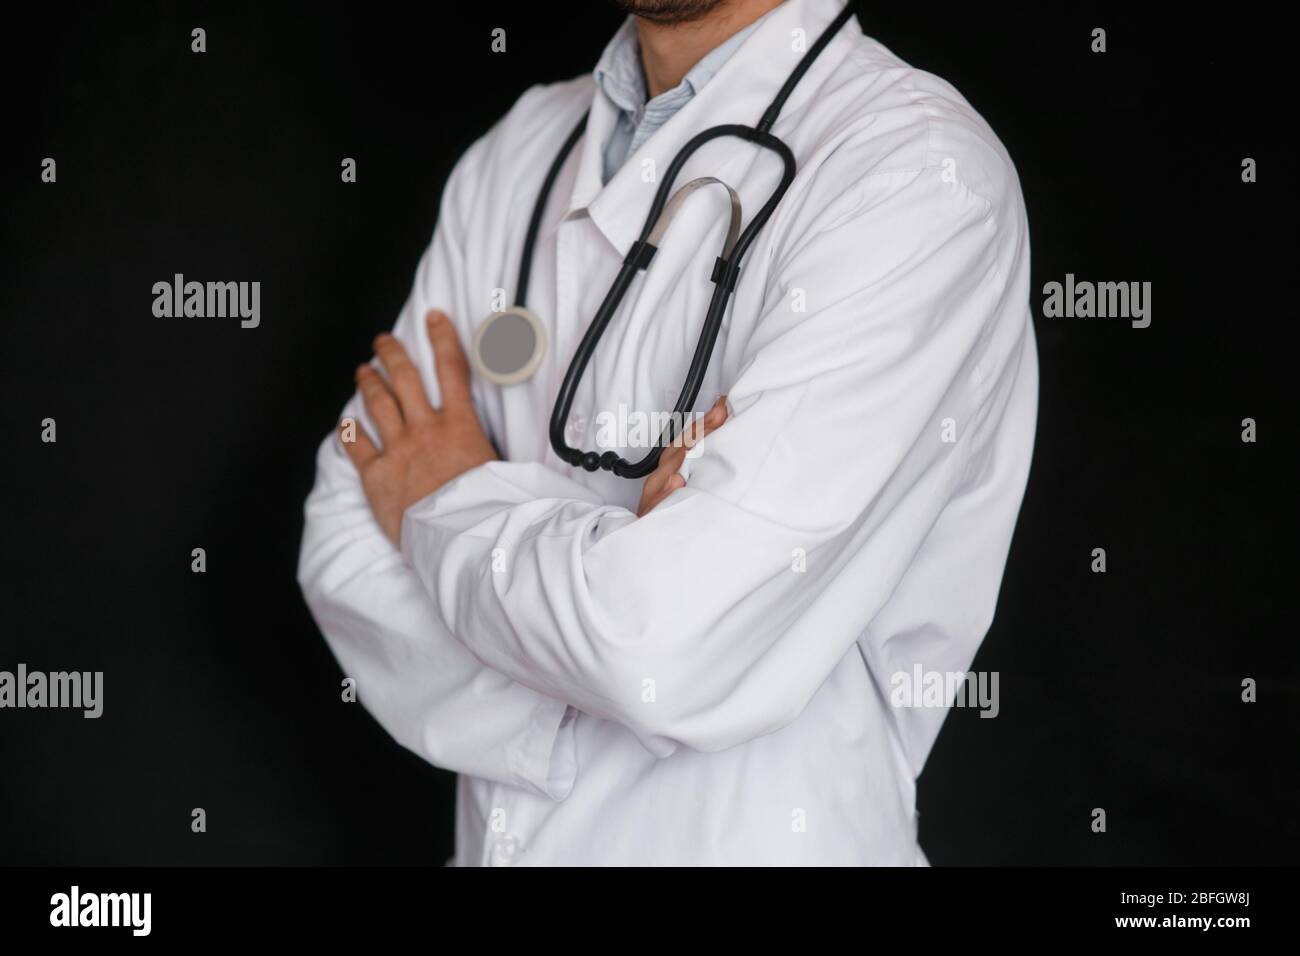 Male Doctor on a black background with a stethoscope in his hands close-up. Stock Photo